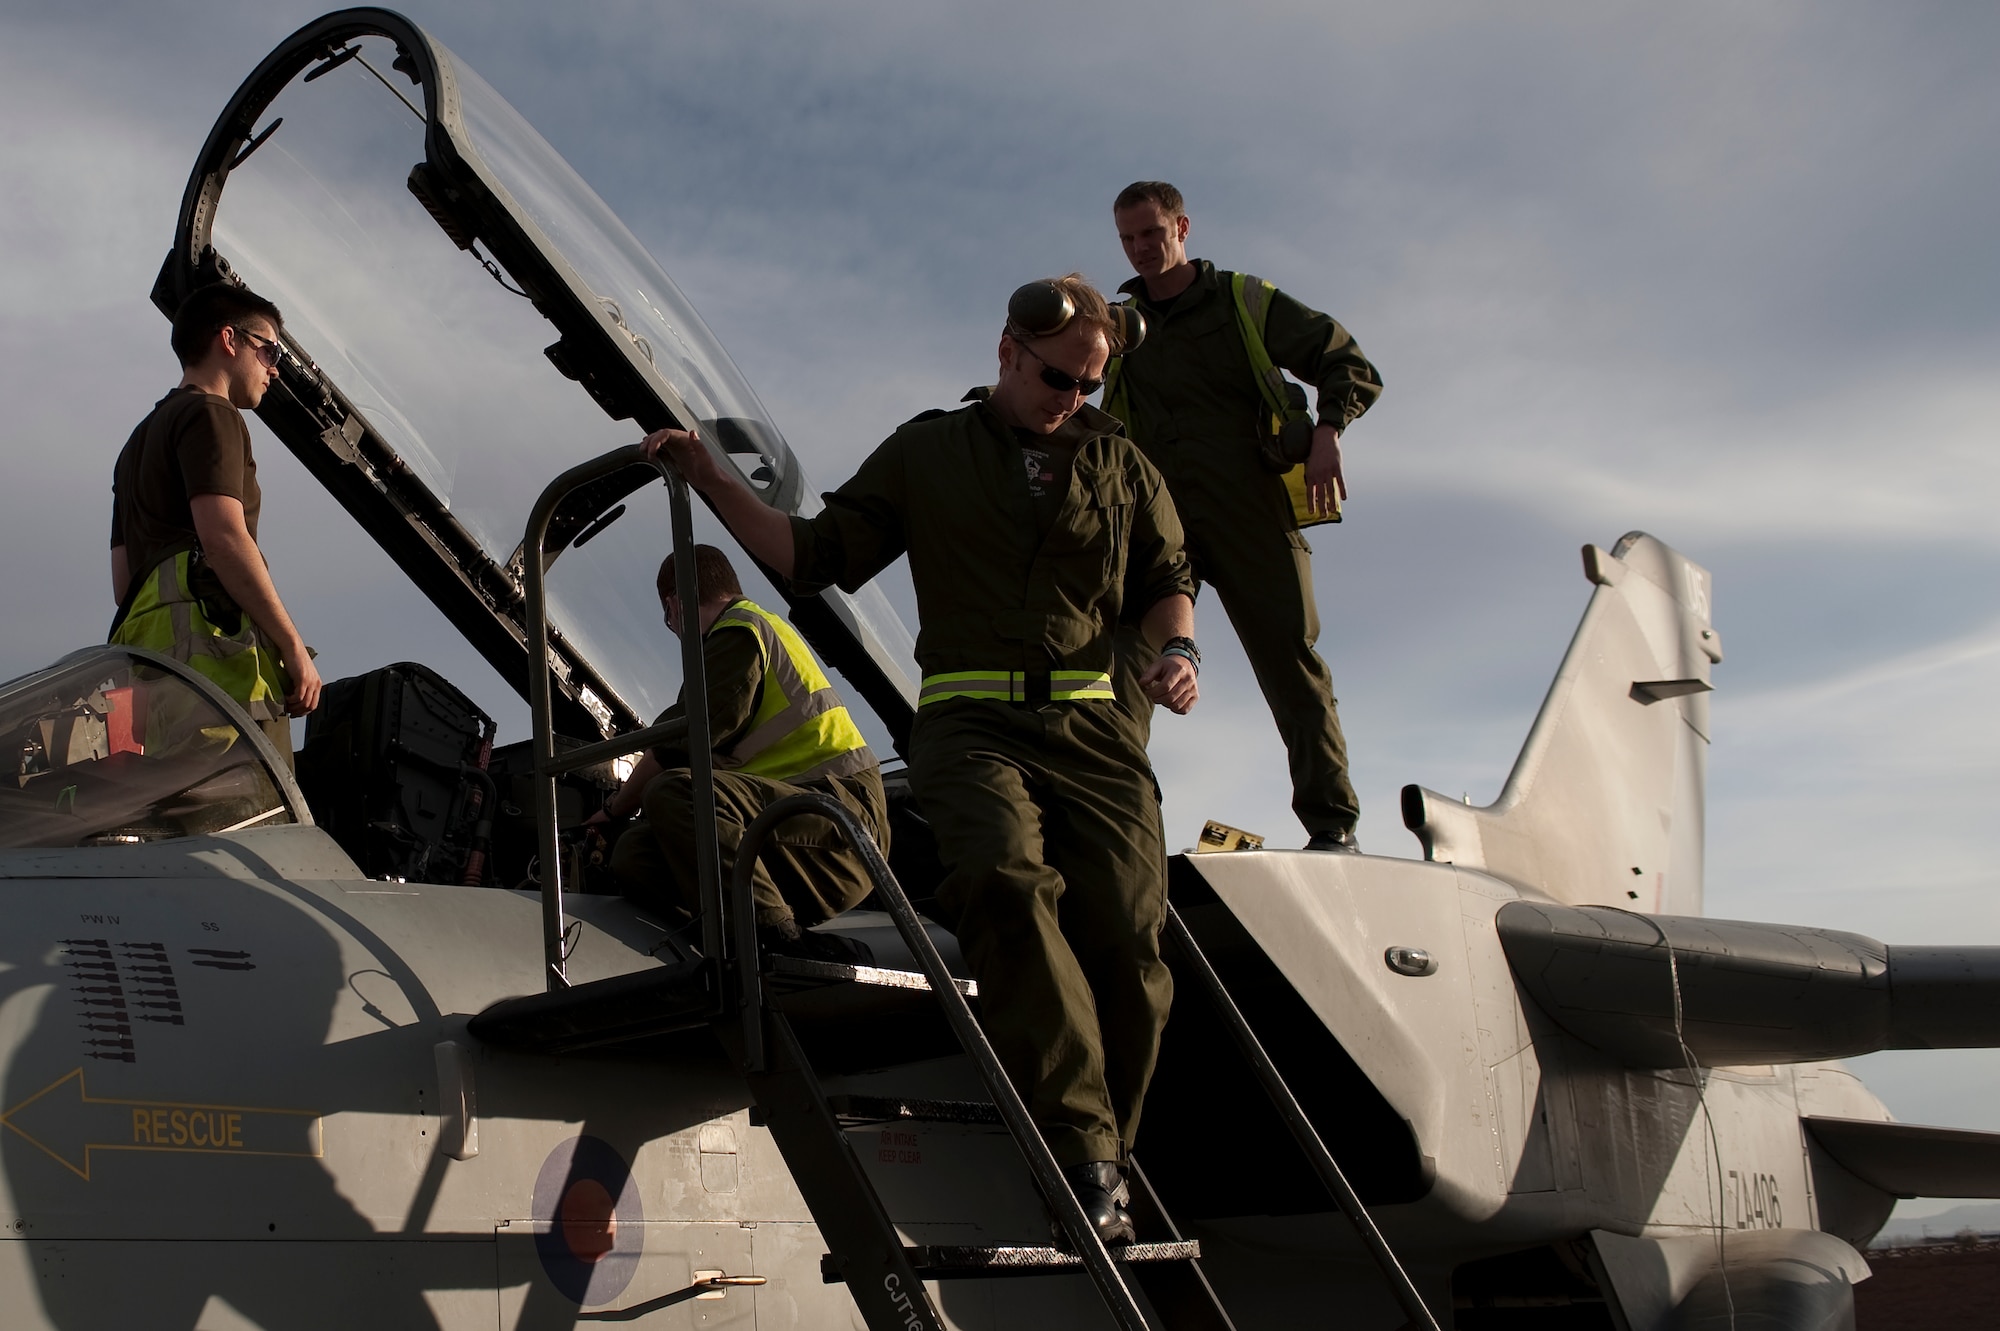 Royal Air Force of the United Kingdom Airmen, 2nd Army Cooperation Squadron, RAF Marham, conduct preventive maintenance on a GR4 Tornado, during Red Flag 12-3 March 5, 2012, at Nellis Air Force Base, Nev. Red Flag is a realistic combat training exercise involving the air forces of the United States and its allies.(U.S. Air Force photo by Staff Sgt. Christopher Hubenthal)